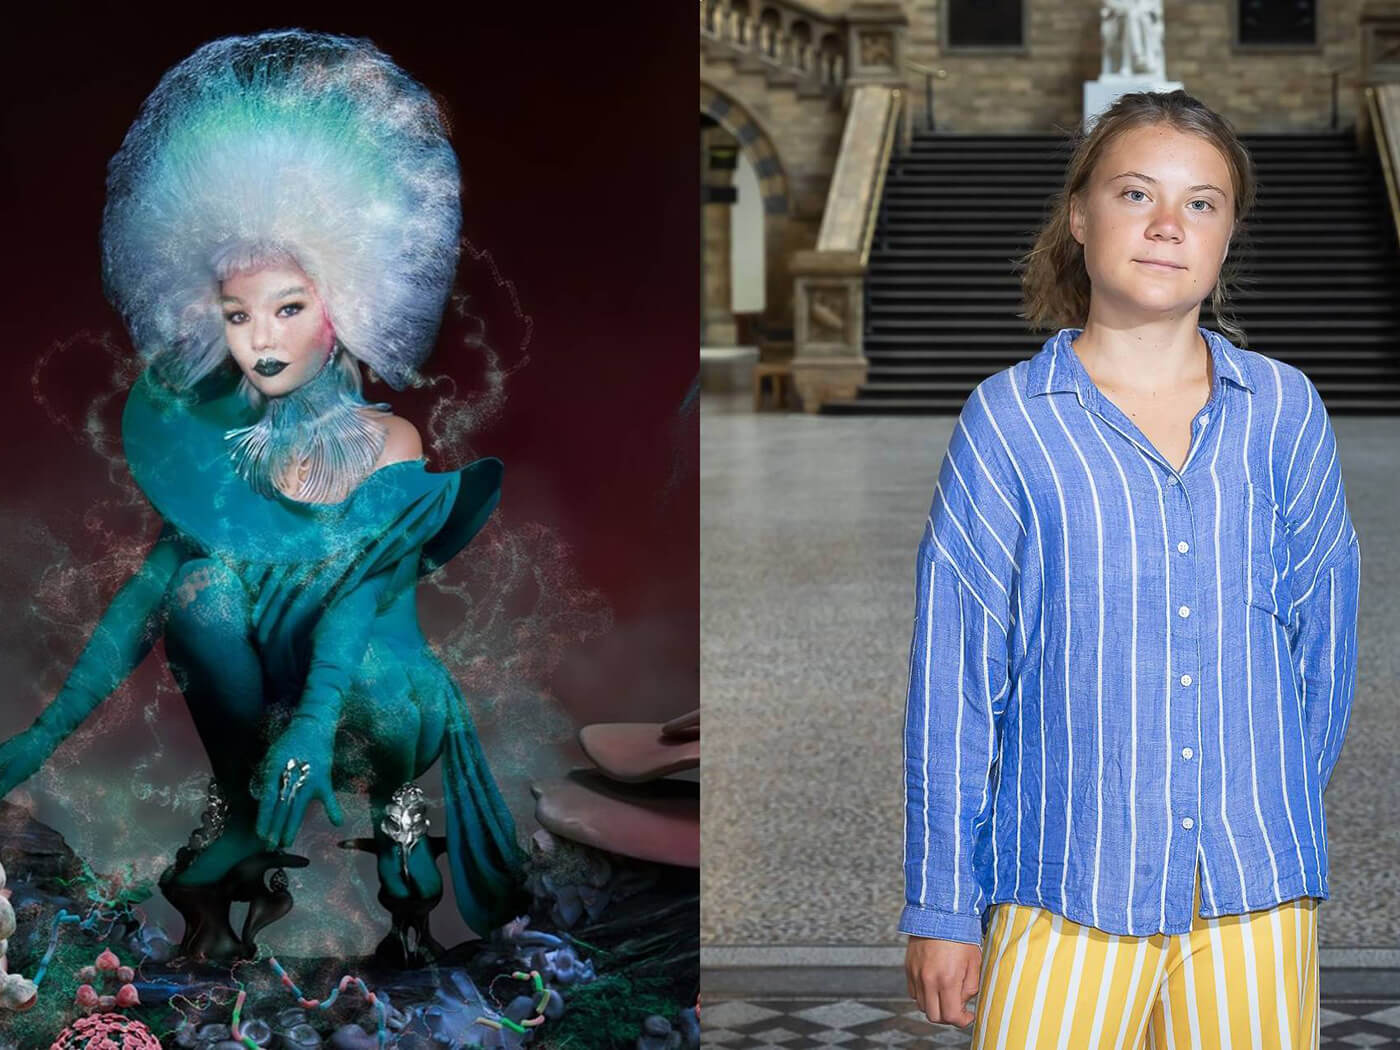 Björk and Greta Thunberg in conversation: “We have to take turns in holding the torch”